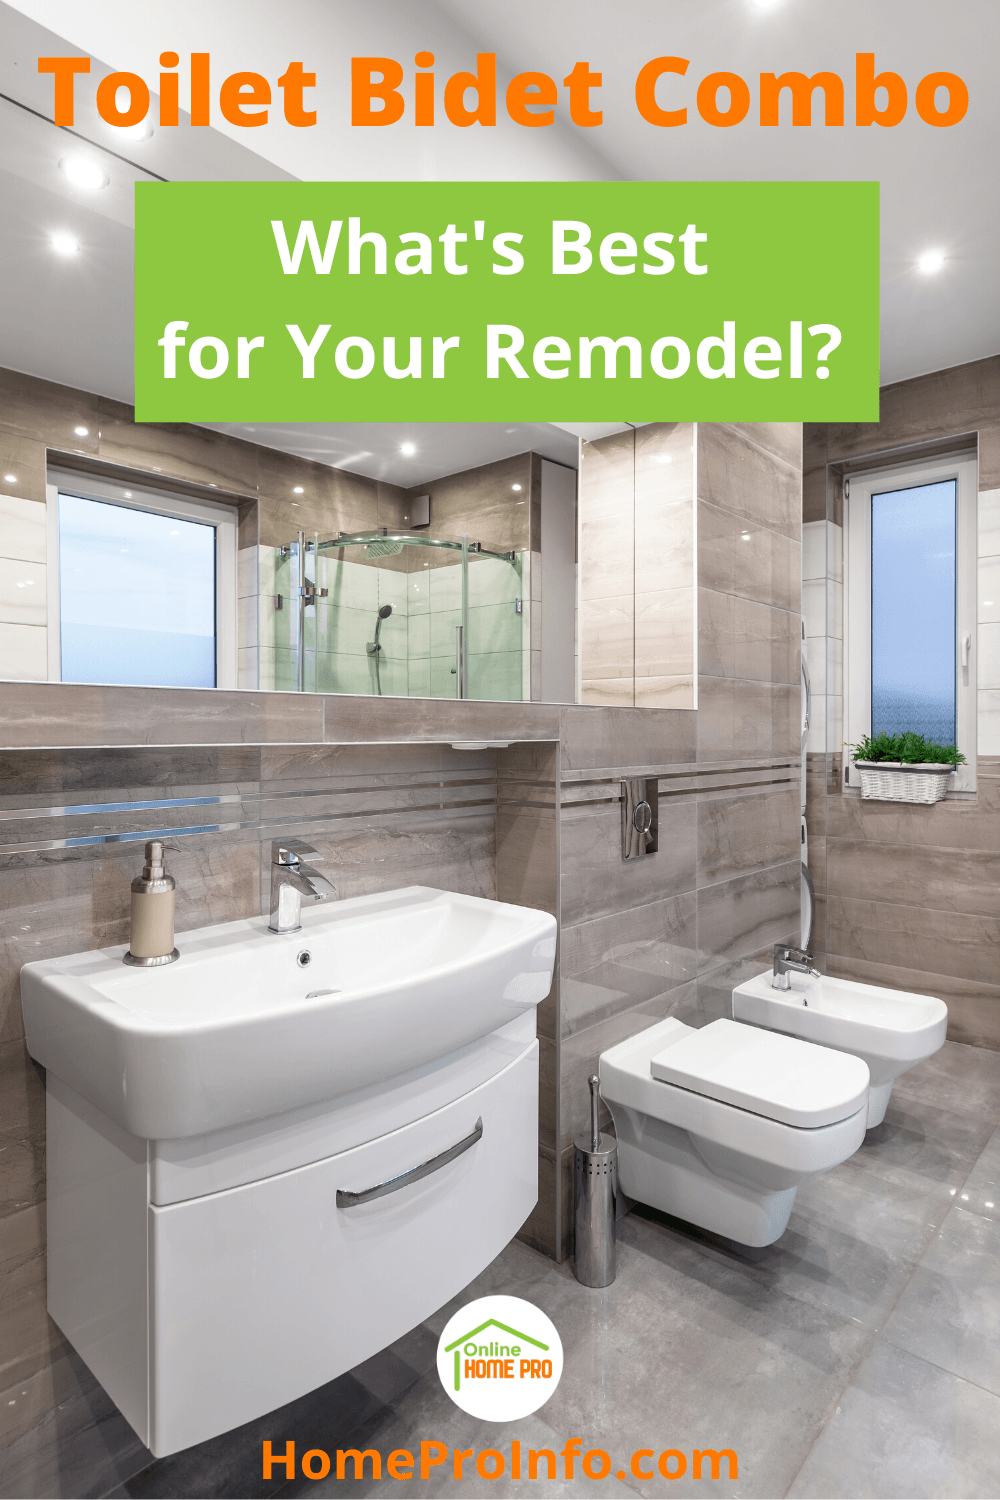 toilet bidet combo and remodeling